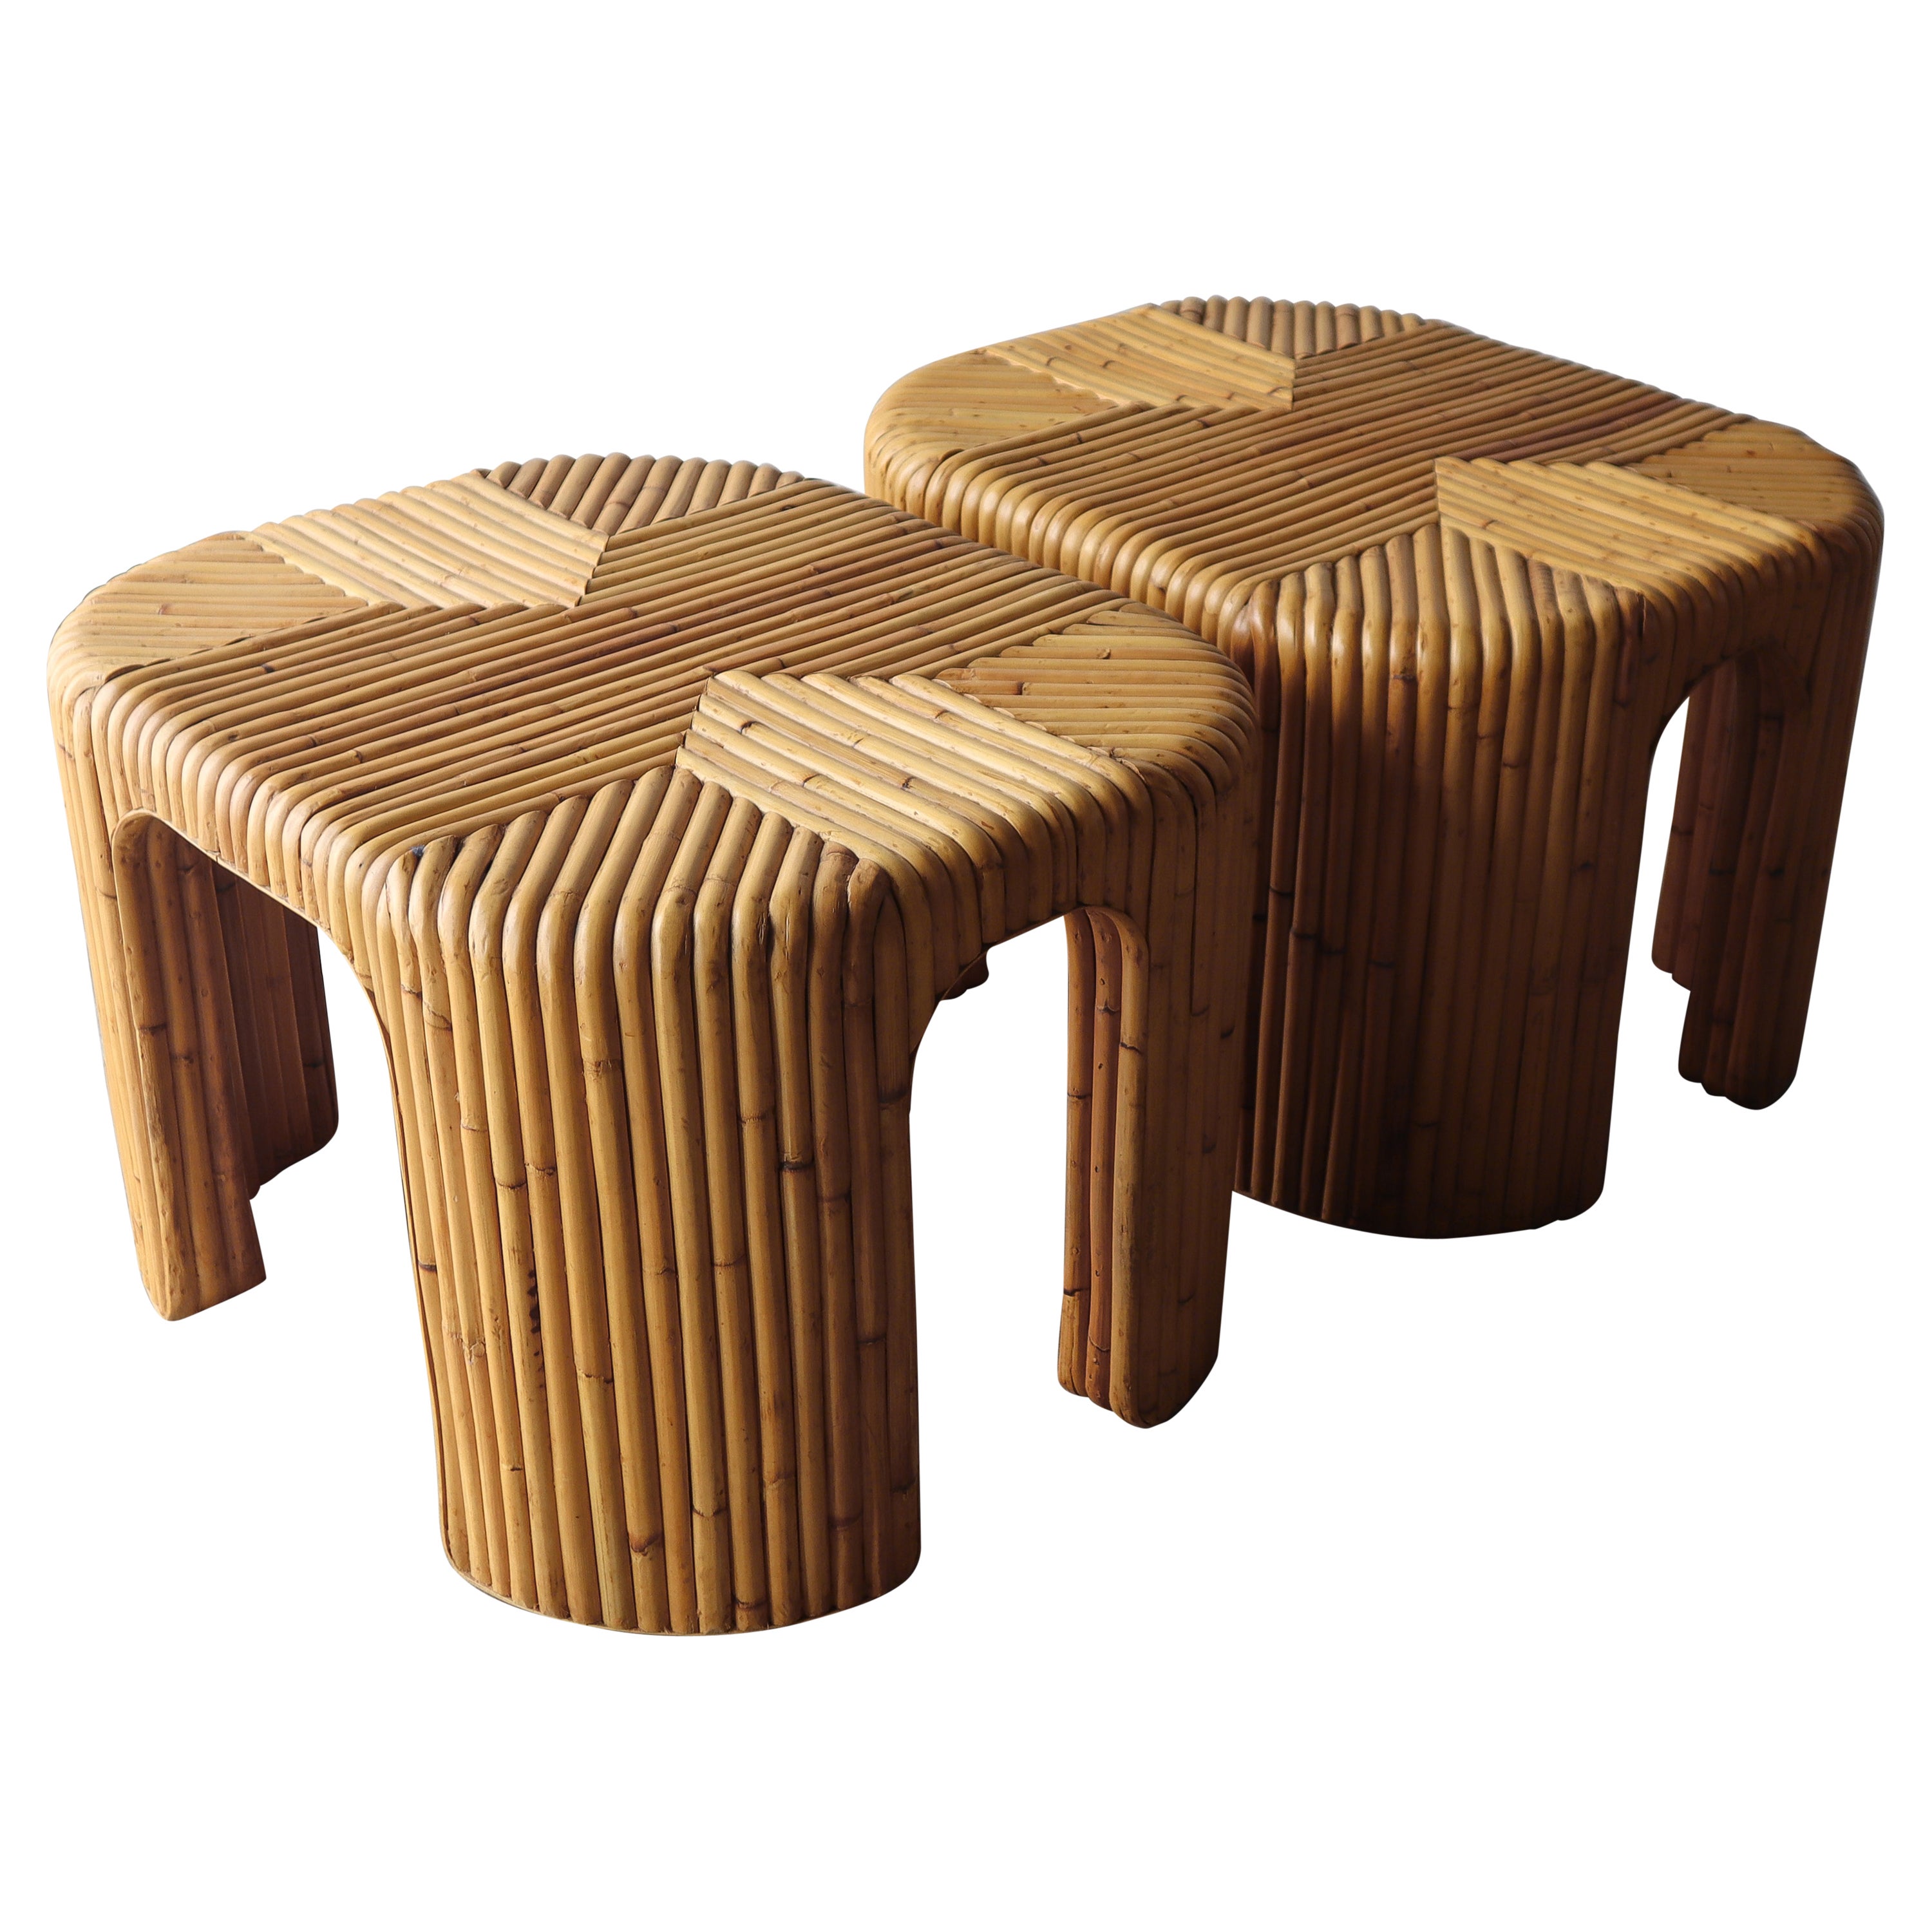 Pair of Vintage Reeded Bamboo Side Tables